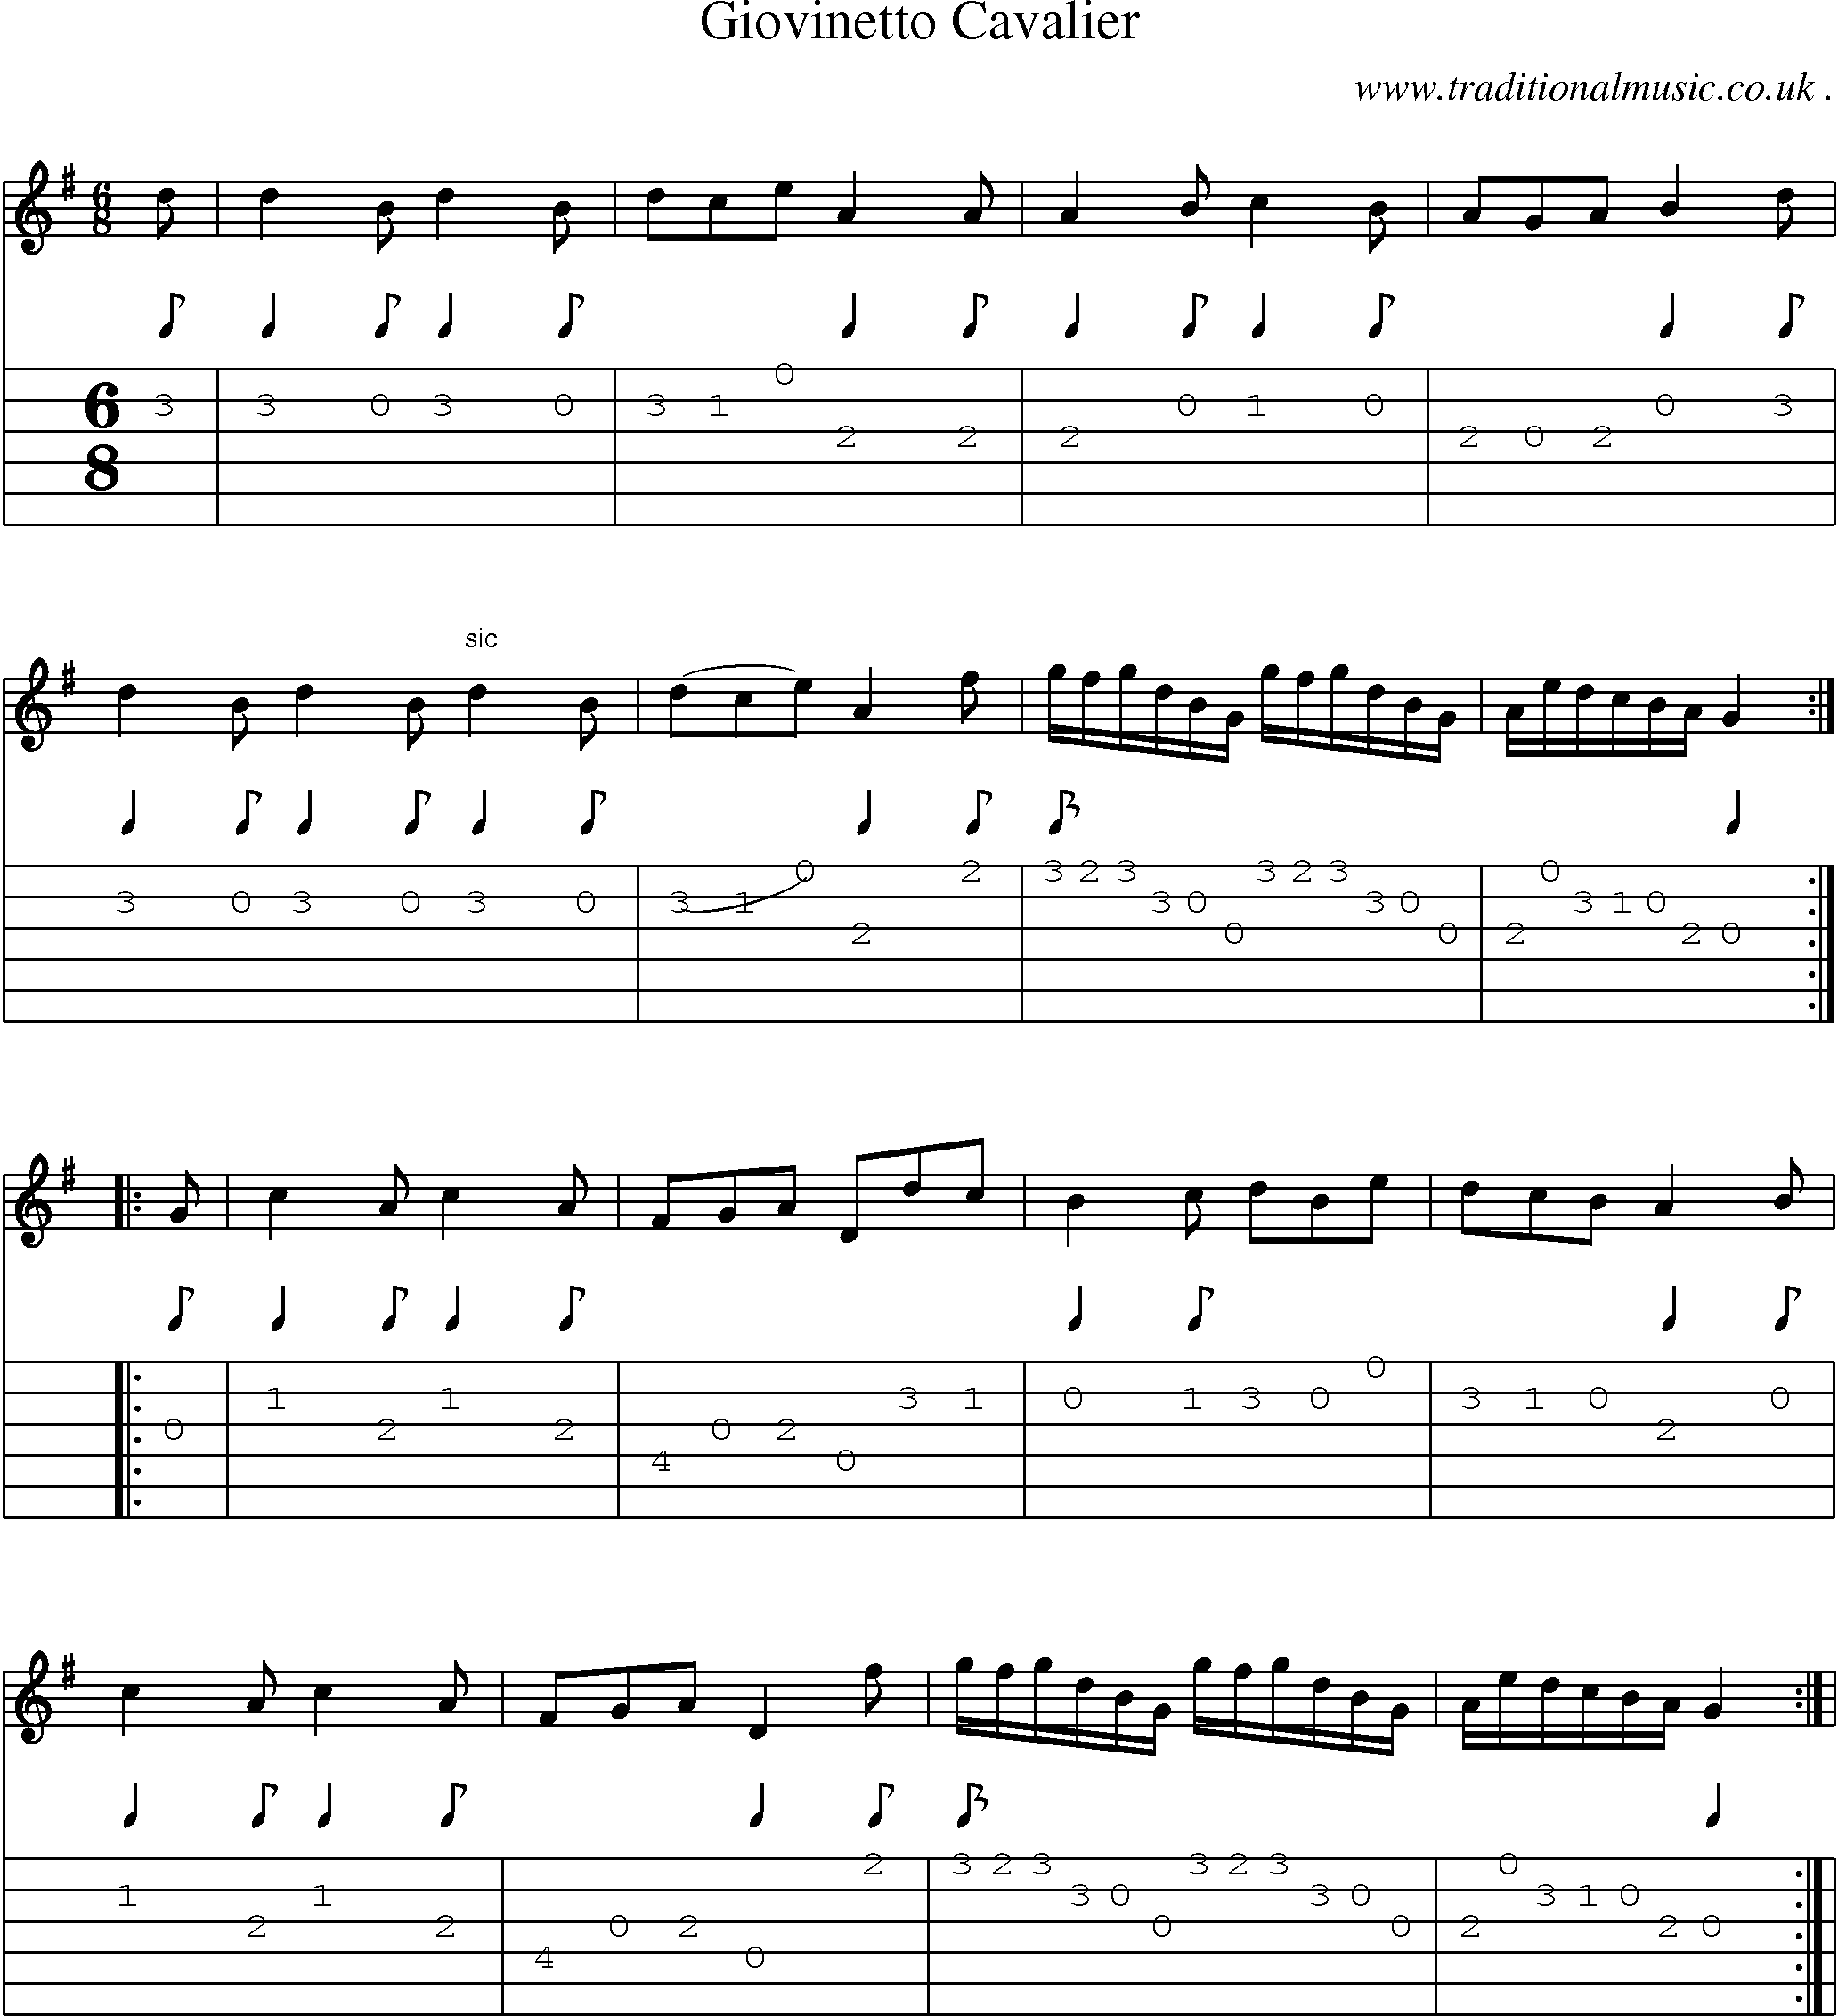 Sheet-Music and Guitar Tabs for Giovinetto Cavalier